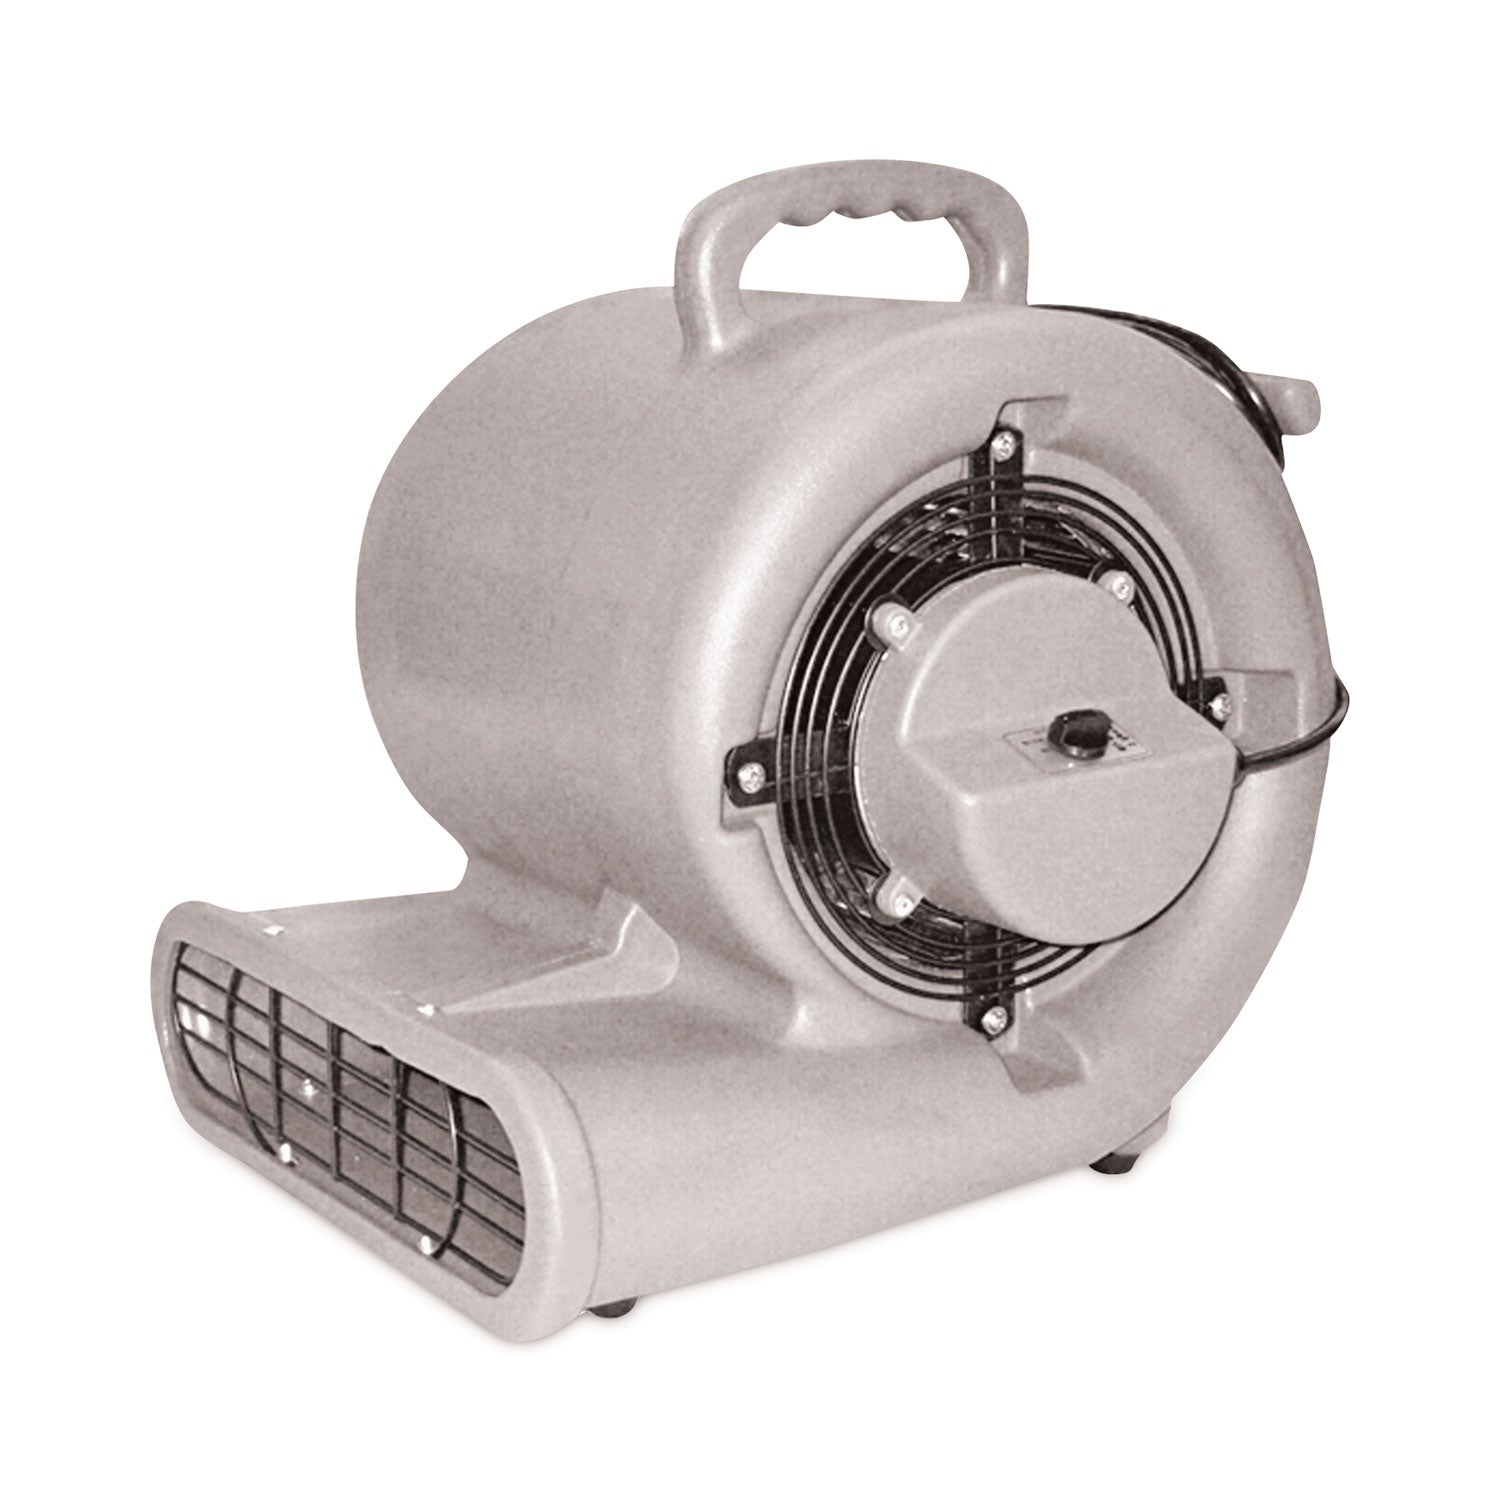 air-mover-three-speed-1500-cfm-gray-20-ft-cord_mfm1150 - 2